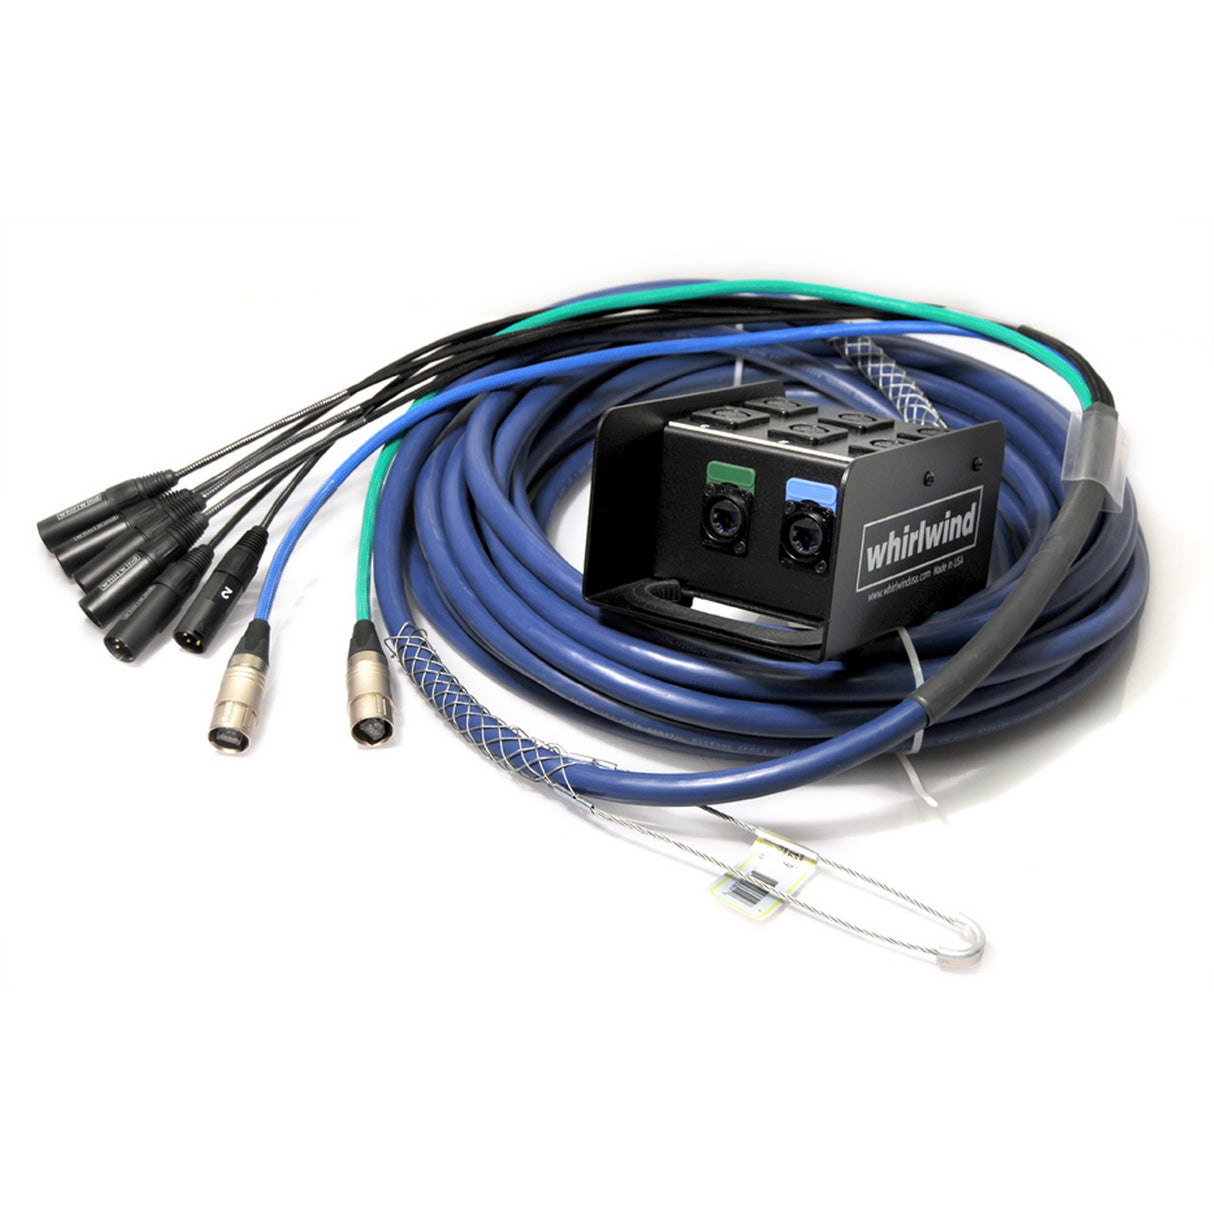 Whirlwind MD-6-2-C6-250 MEDUSA 6 XLR Inputs 2 CAT6 Lines with CAT5e Ethercon Snake Cable, 250-Feet